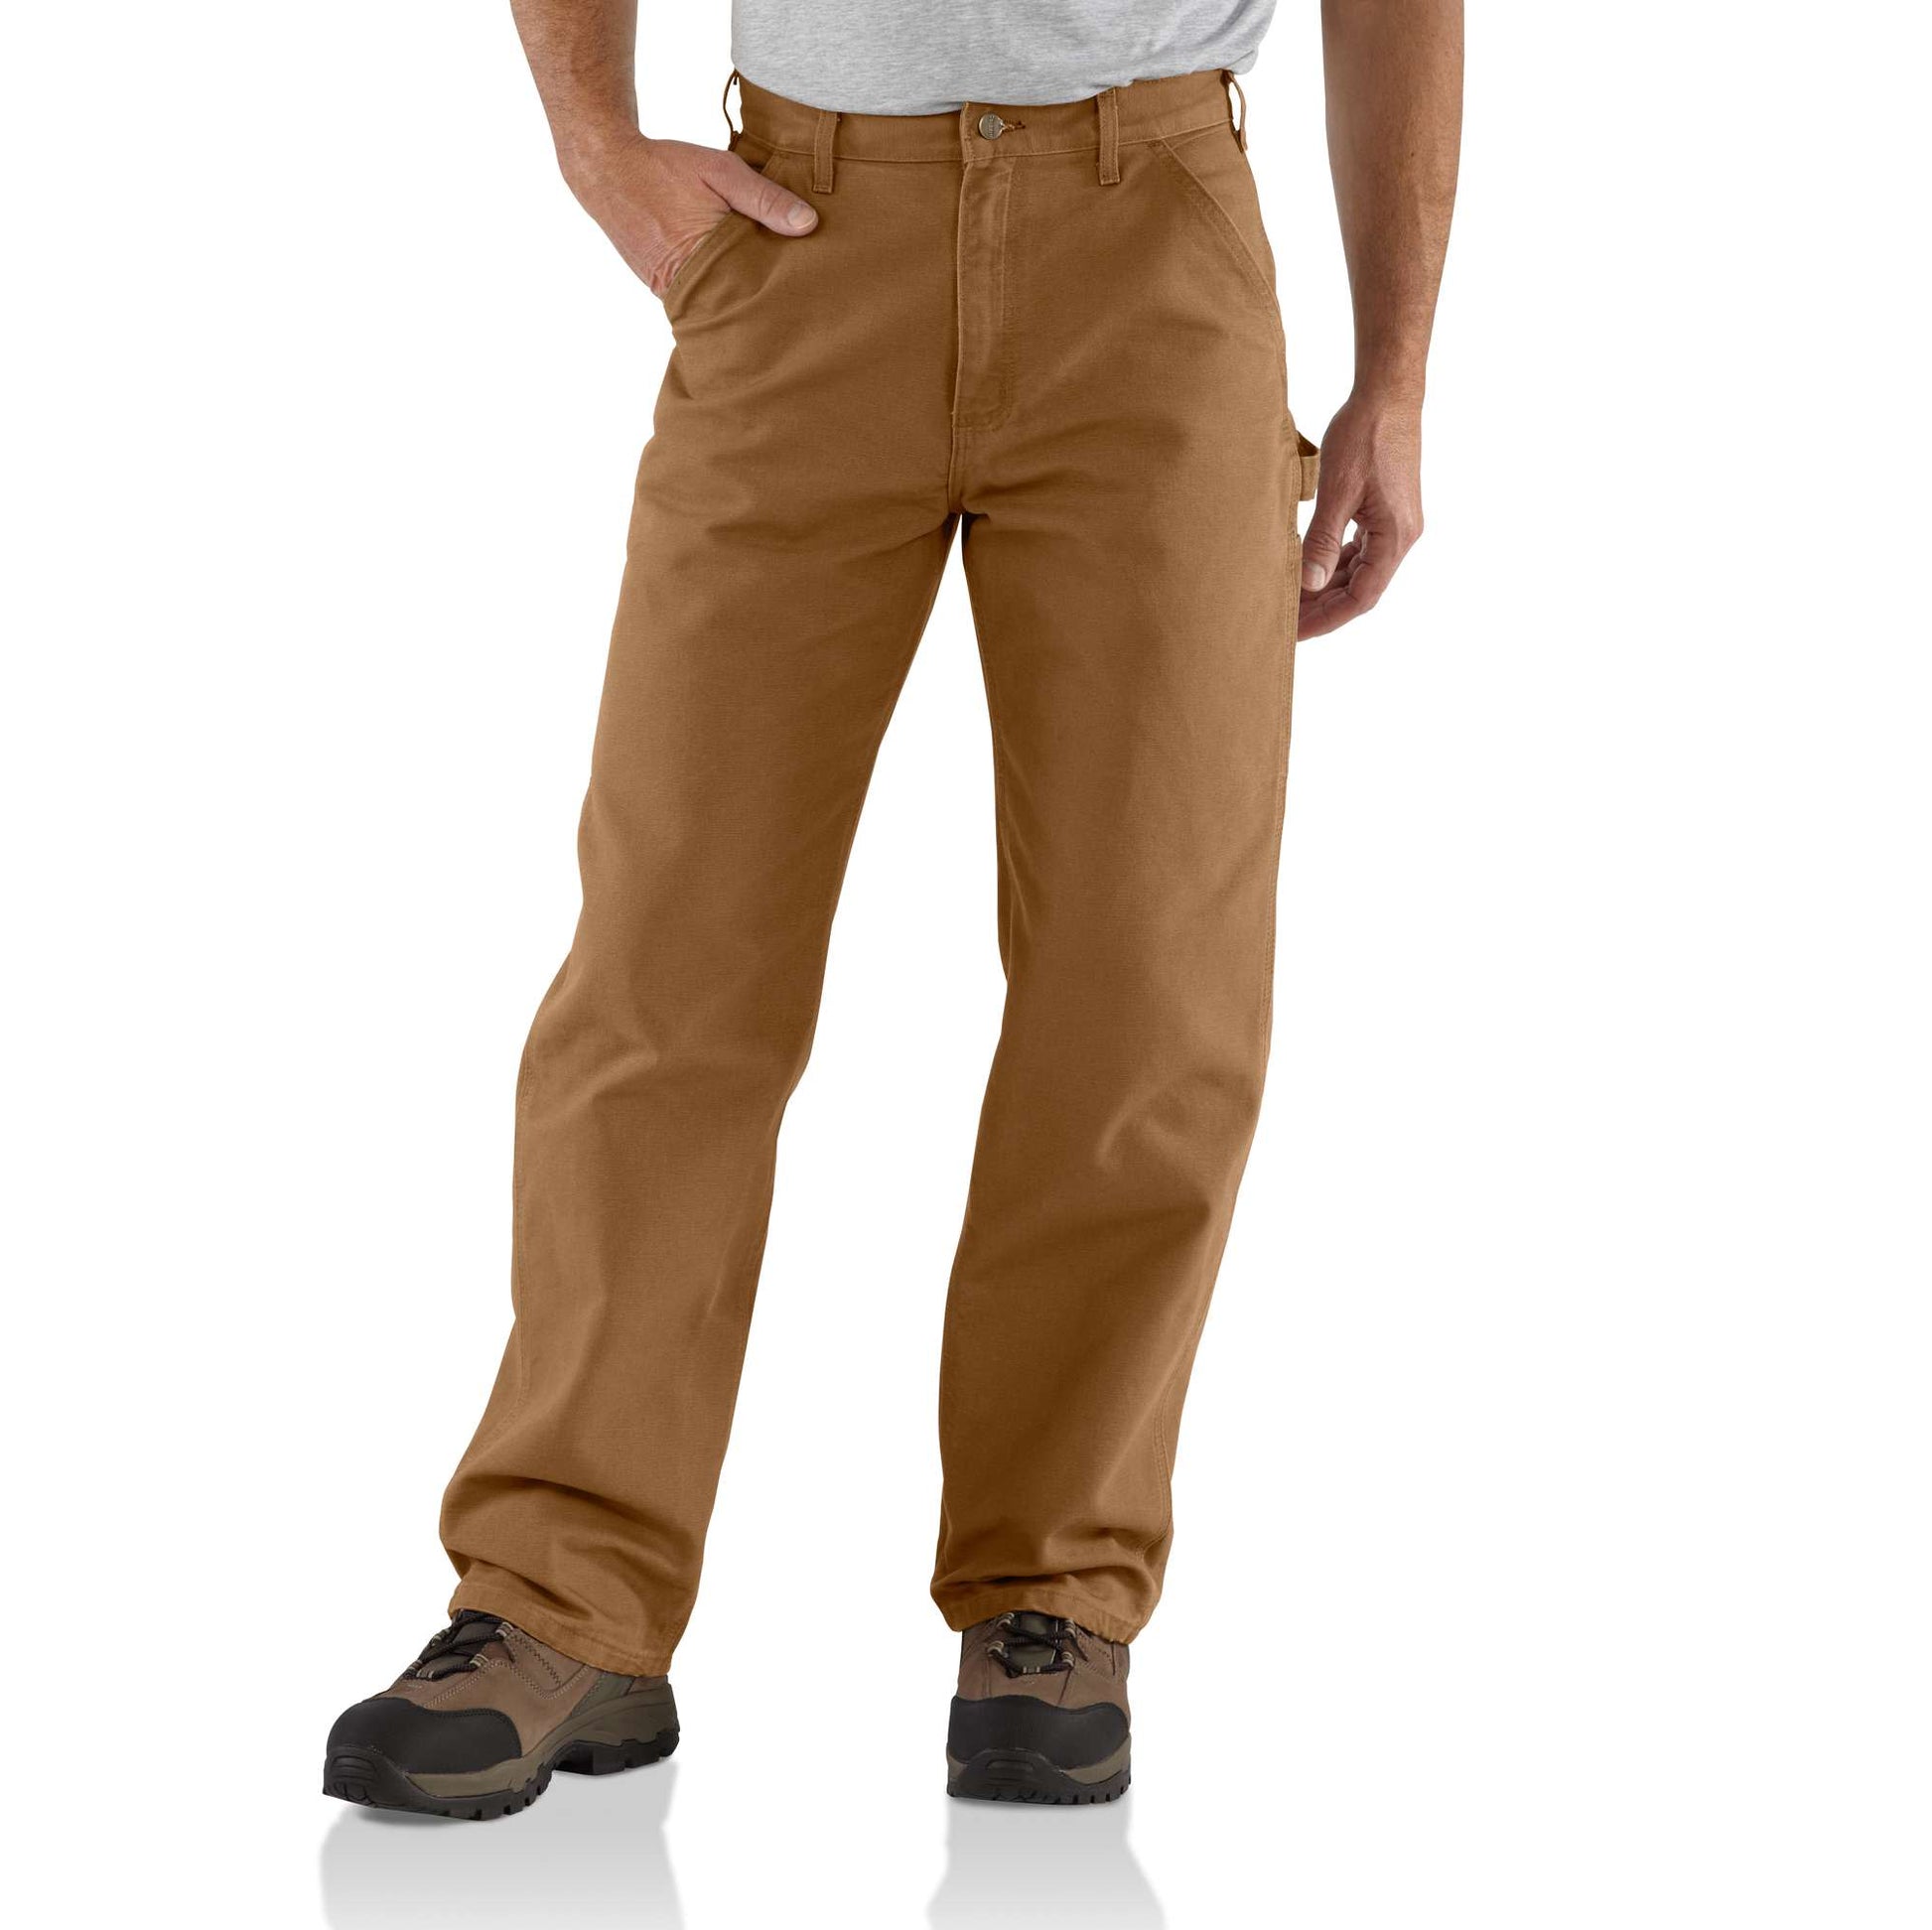 Men's Utility Double-Knee Pant - Loose Fit - Firm Duck, Coming Soon